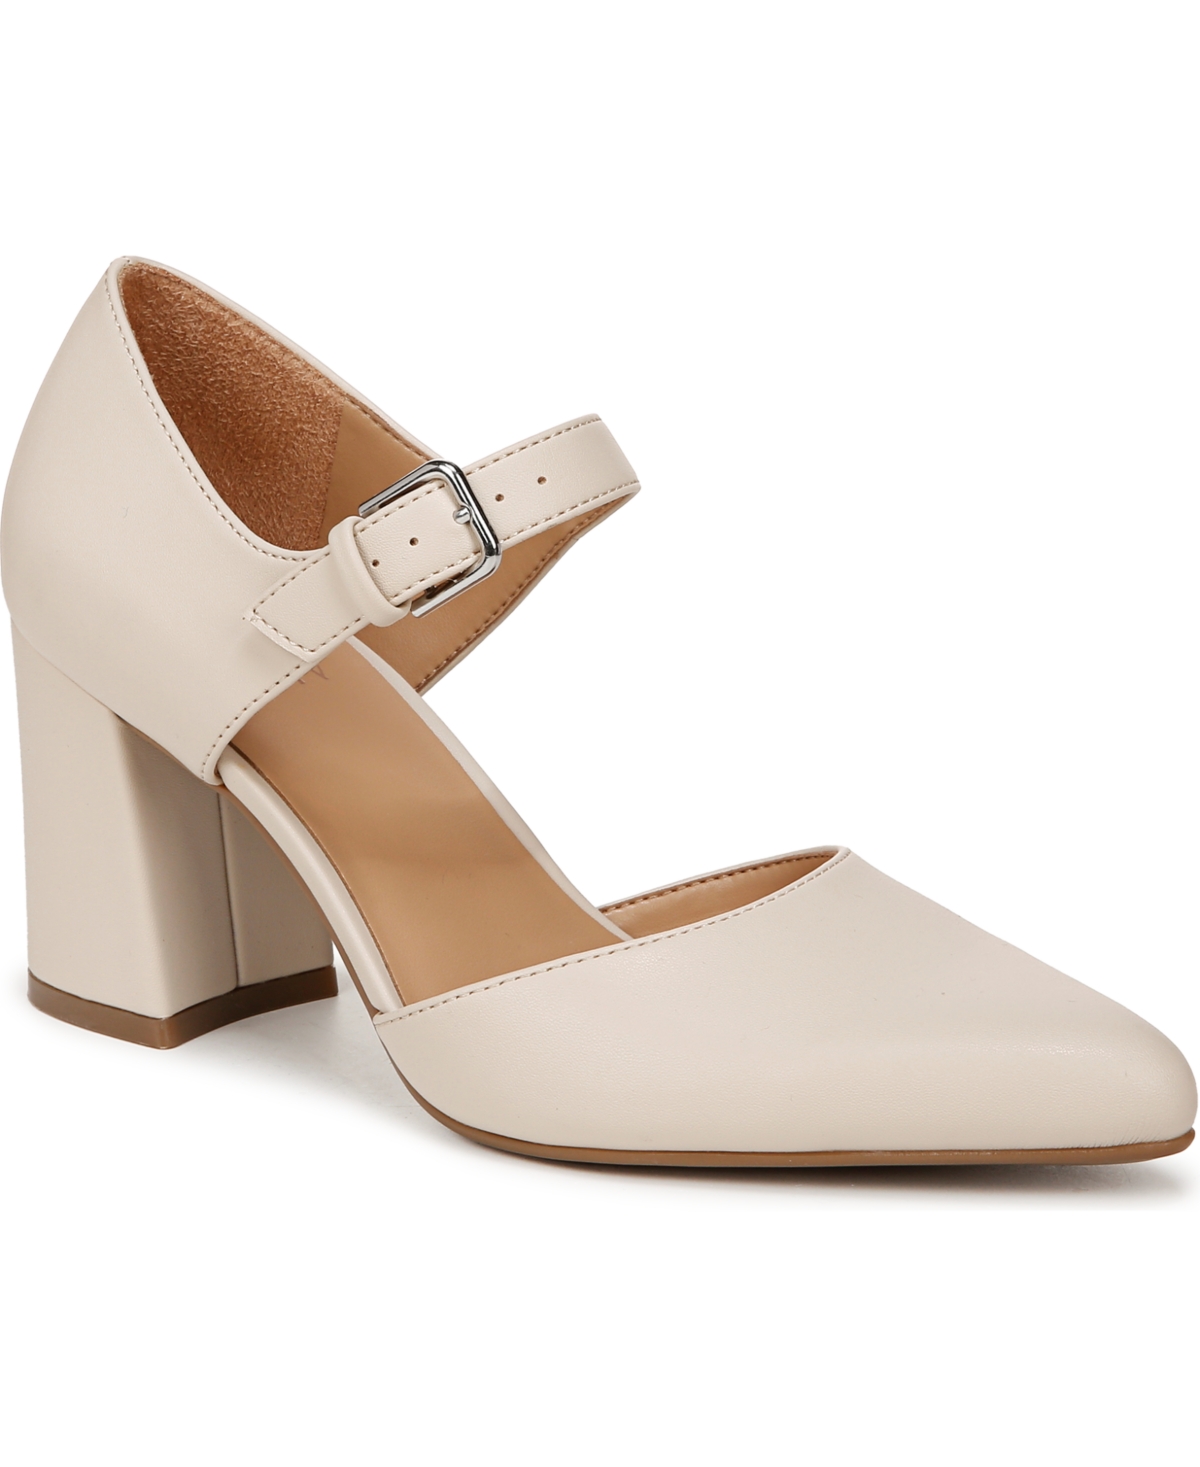 Naturalizer Pixie Mary Jane Pumps In Porcelain Faux Leather